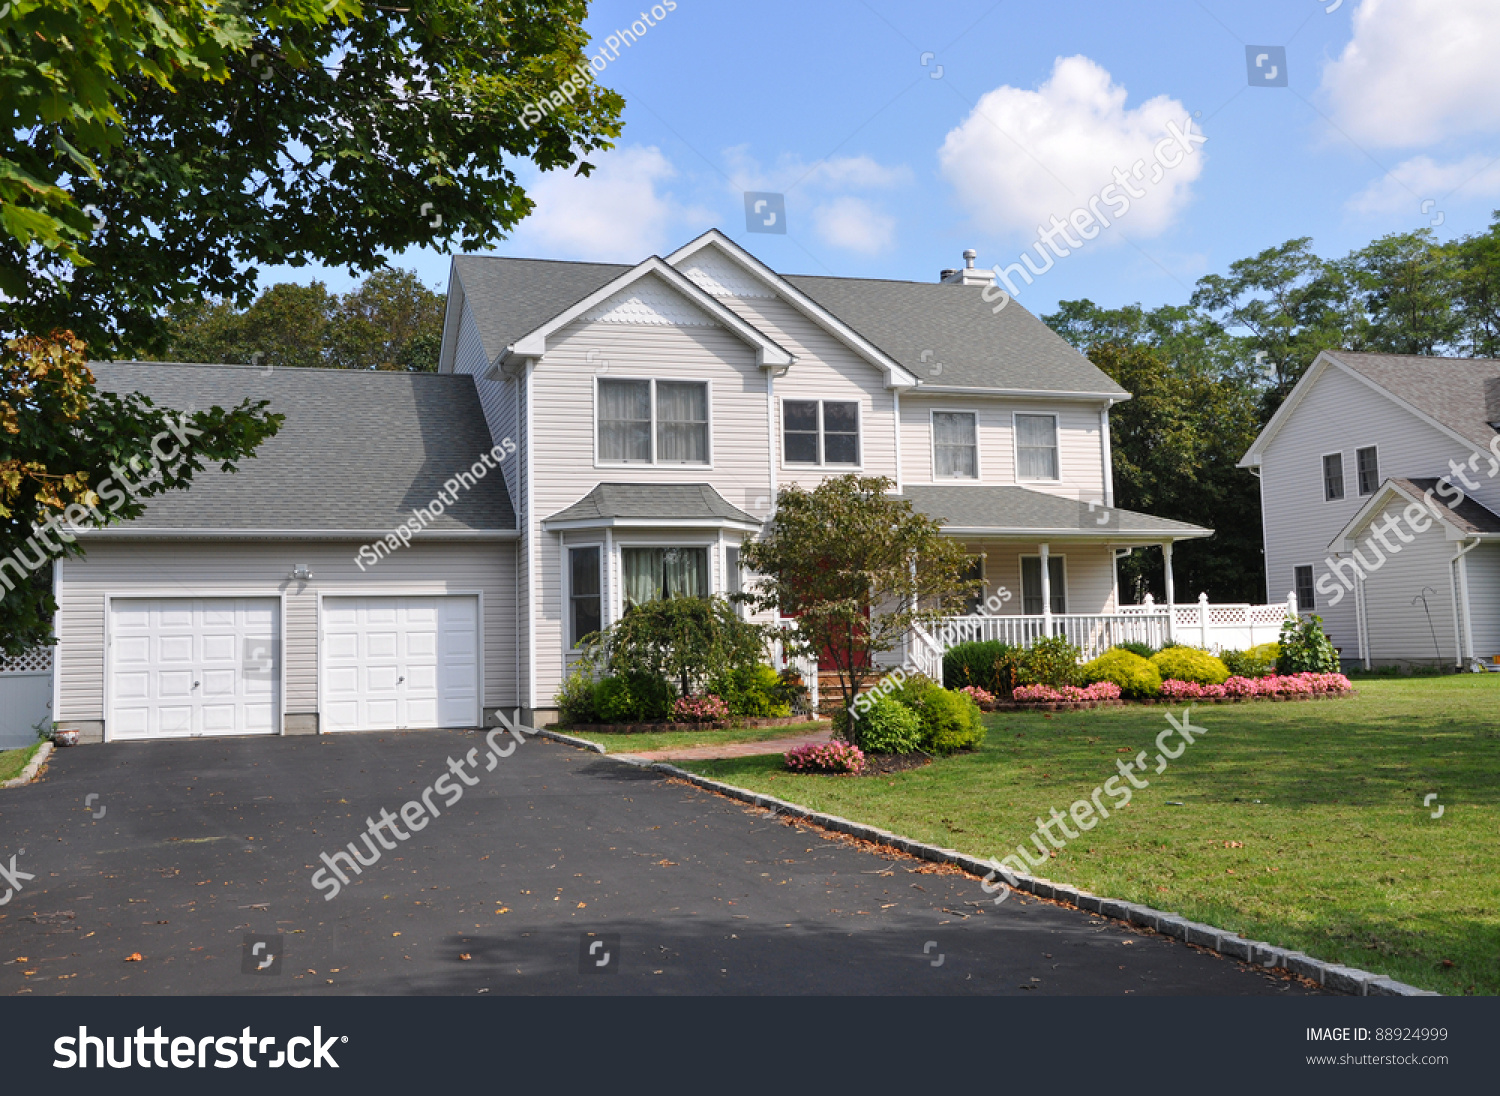 Suburban Two Car Garage Large Siding Home With Double Wide ...